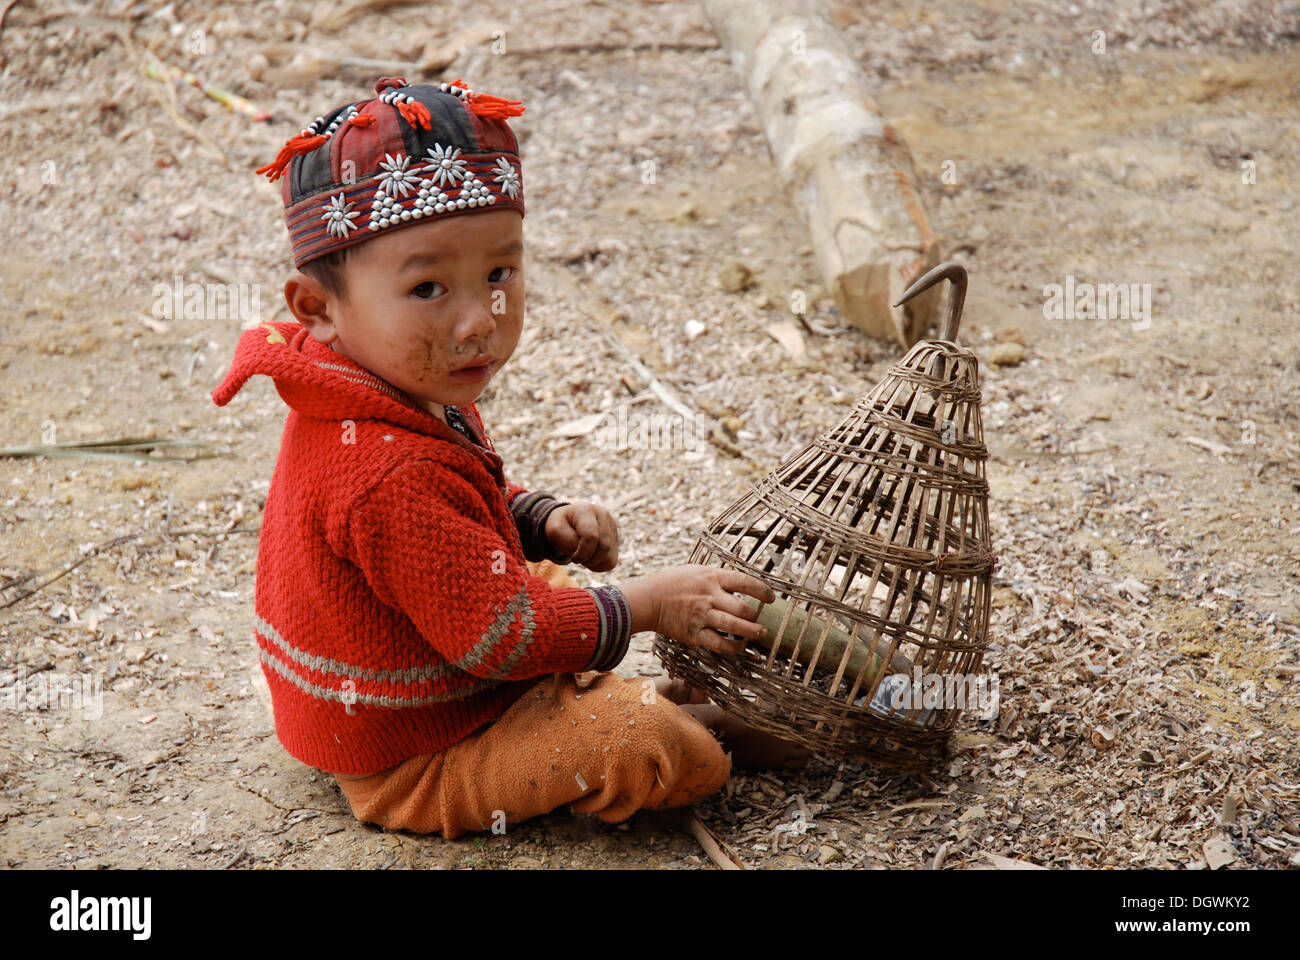 small red dao tribe boy playing with homemade basket Stock Photo